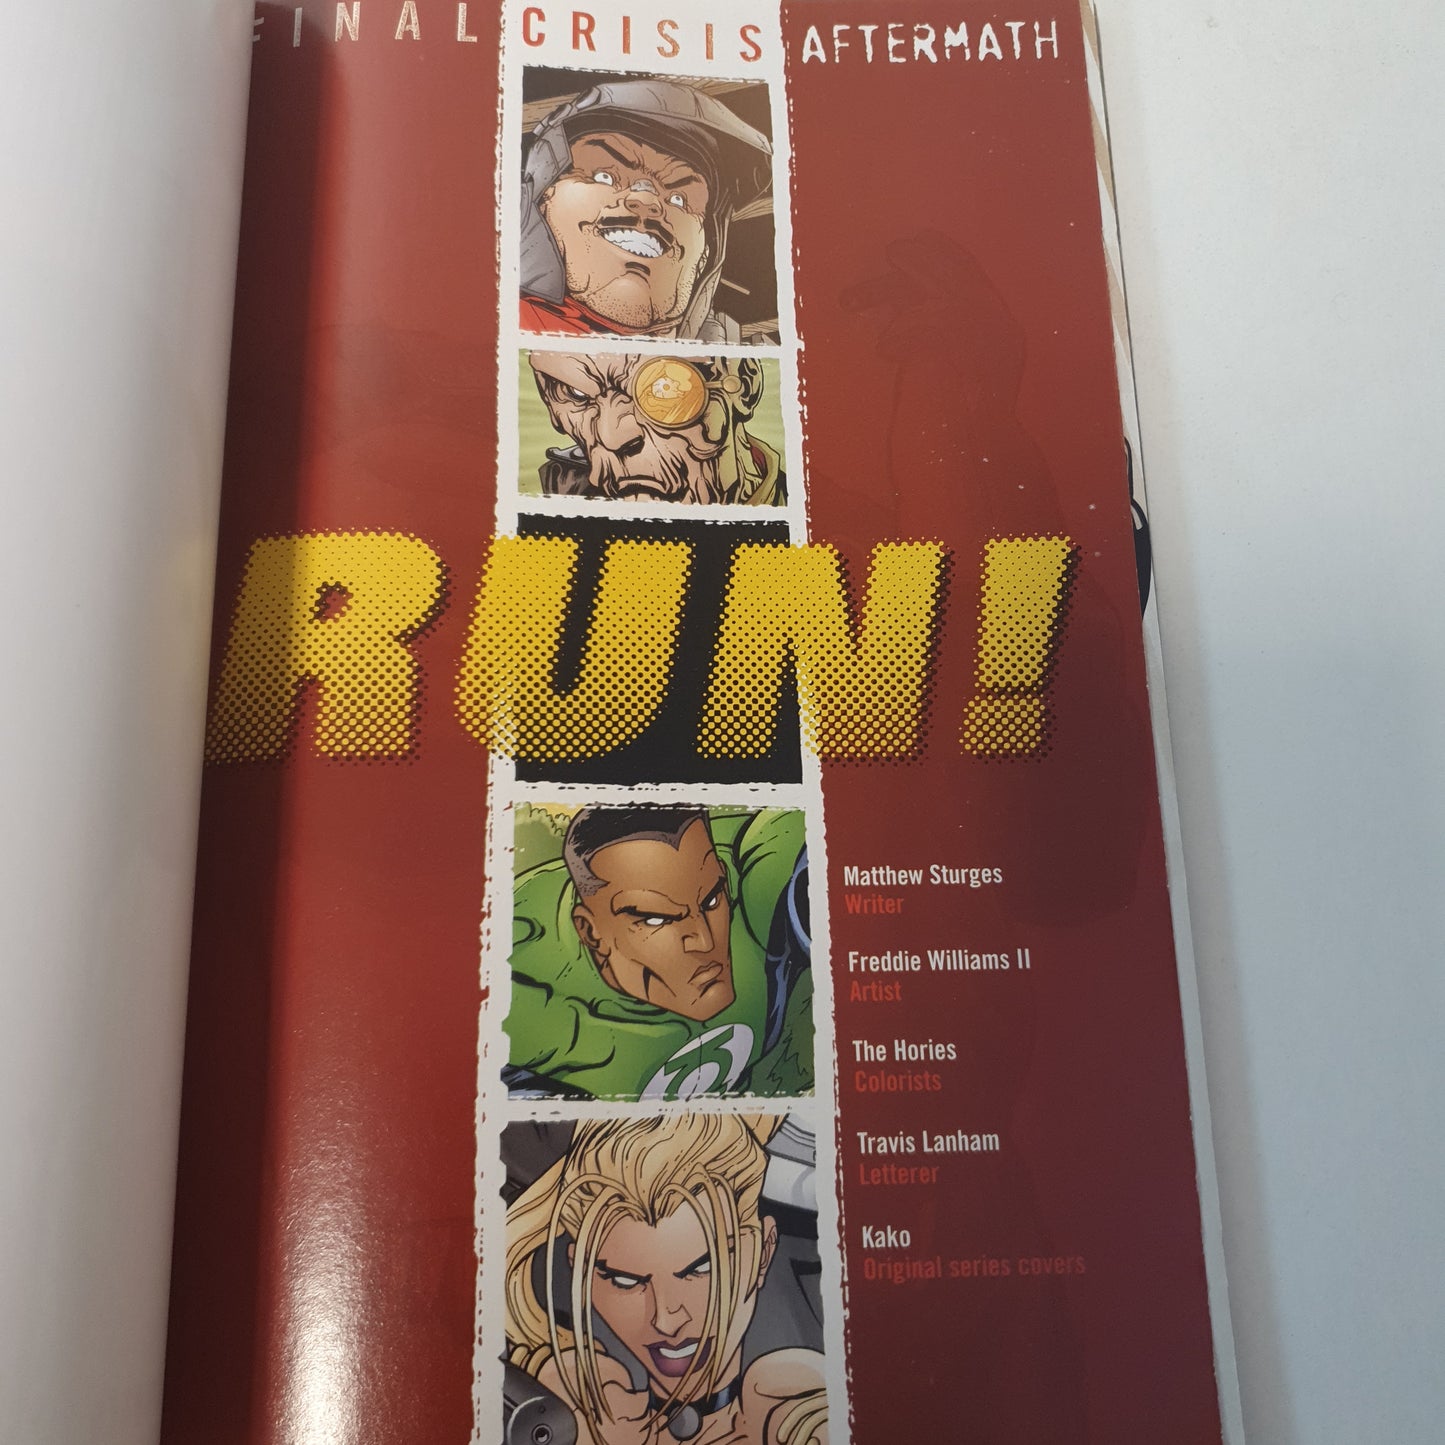 Final Crisis Aftermath: Run! by Sturges & Williams (2009)